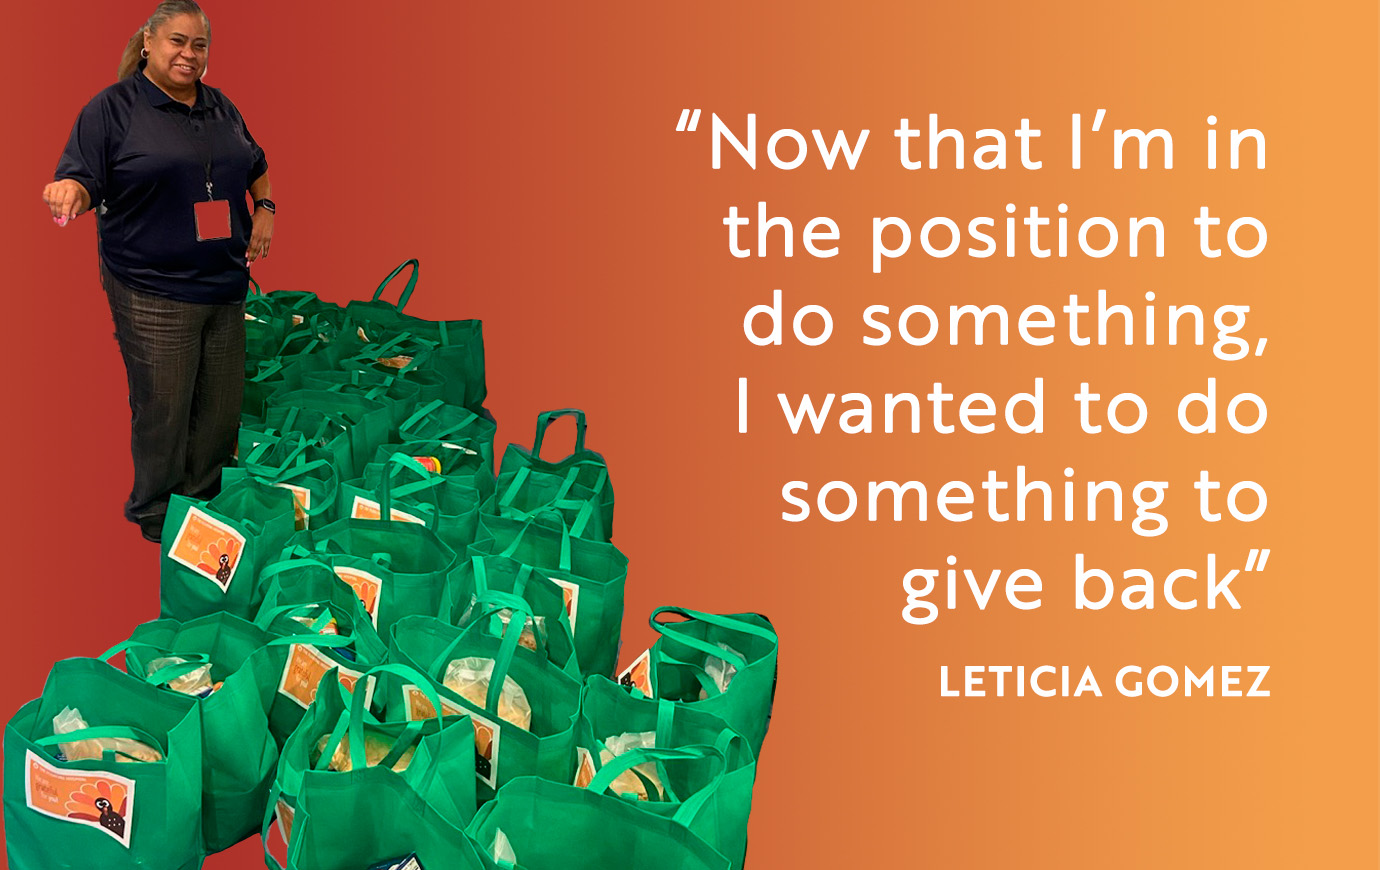 “Now that I’m in the position to do something, I wanted to do something to give back”- Leticia Gomez